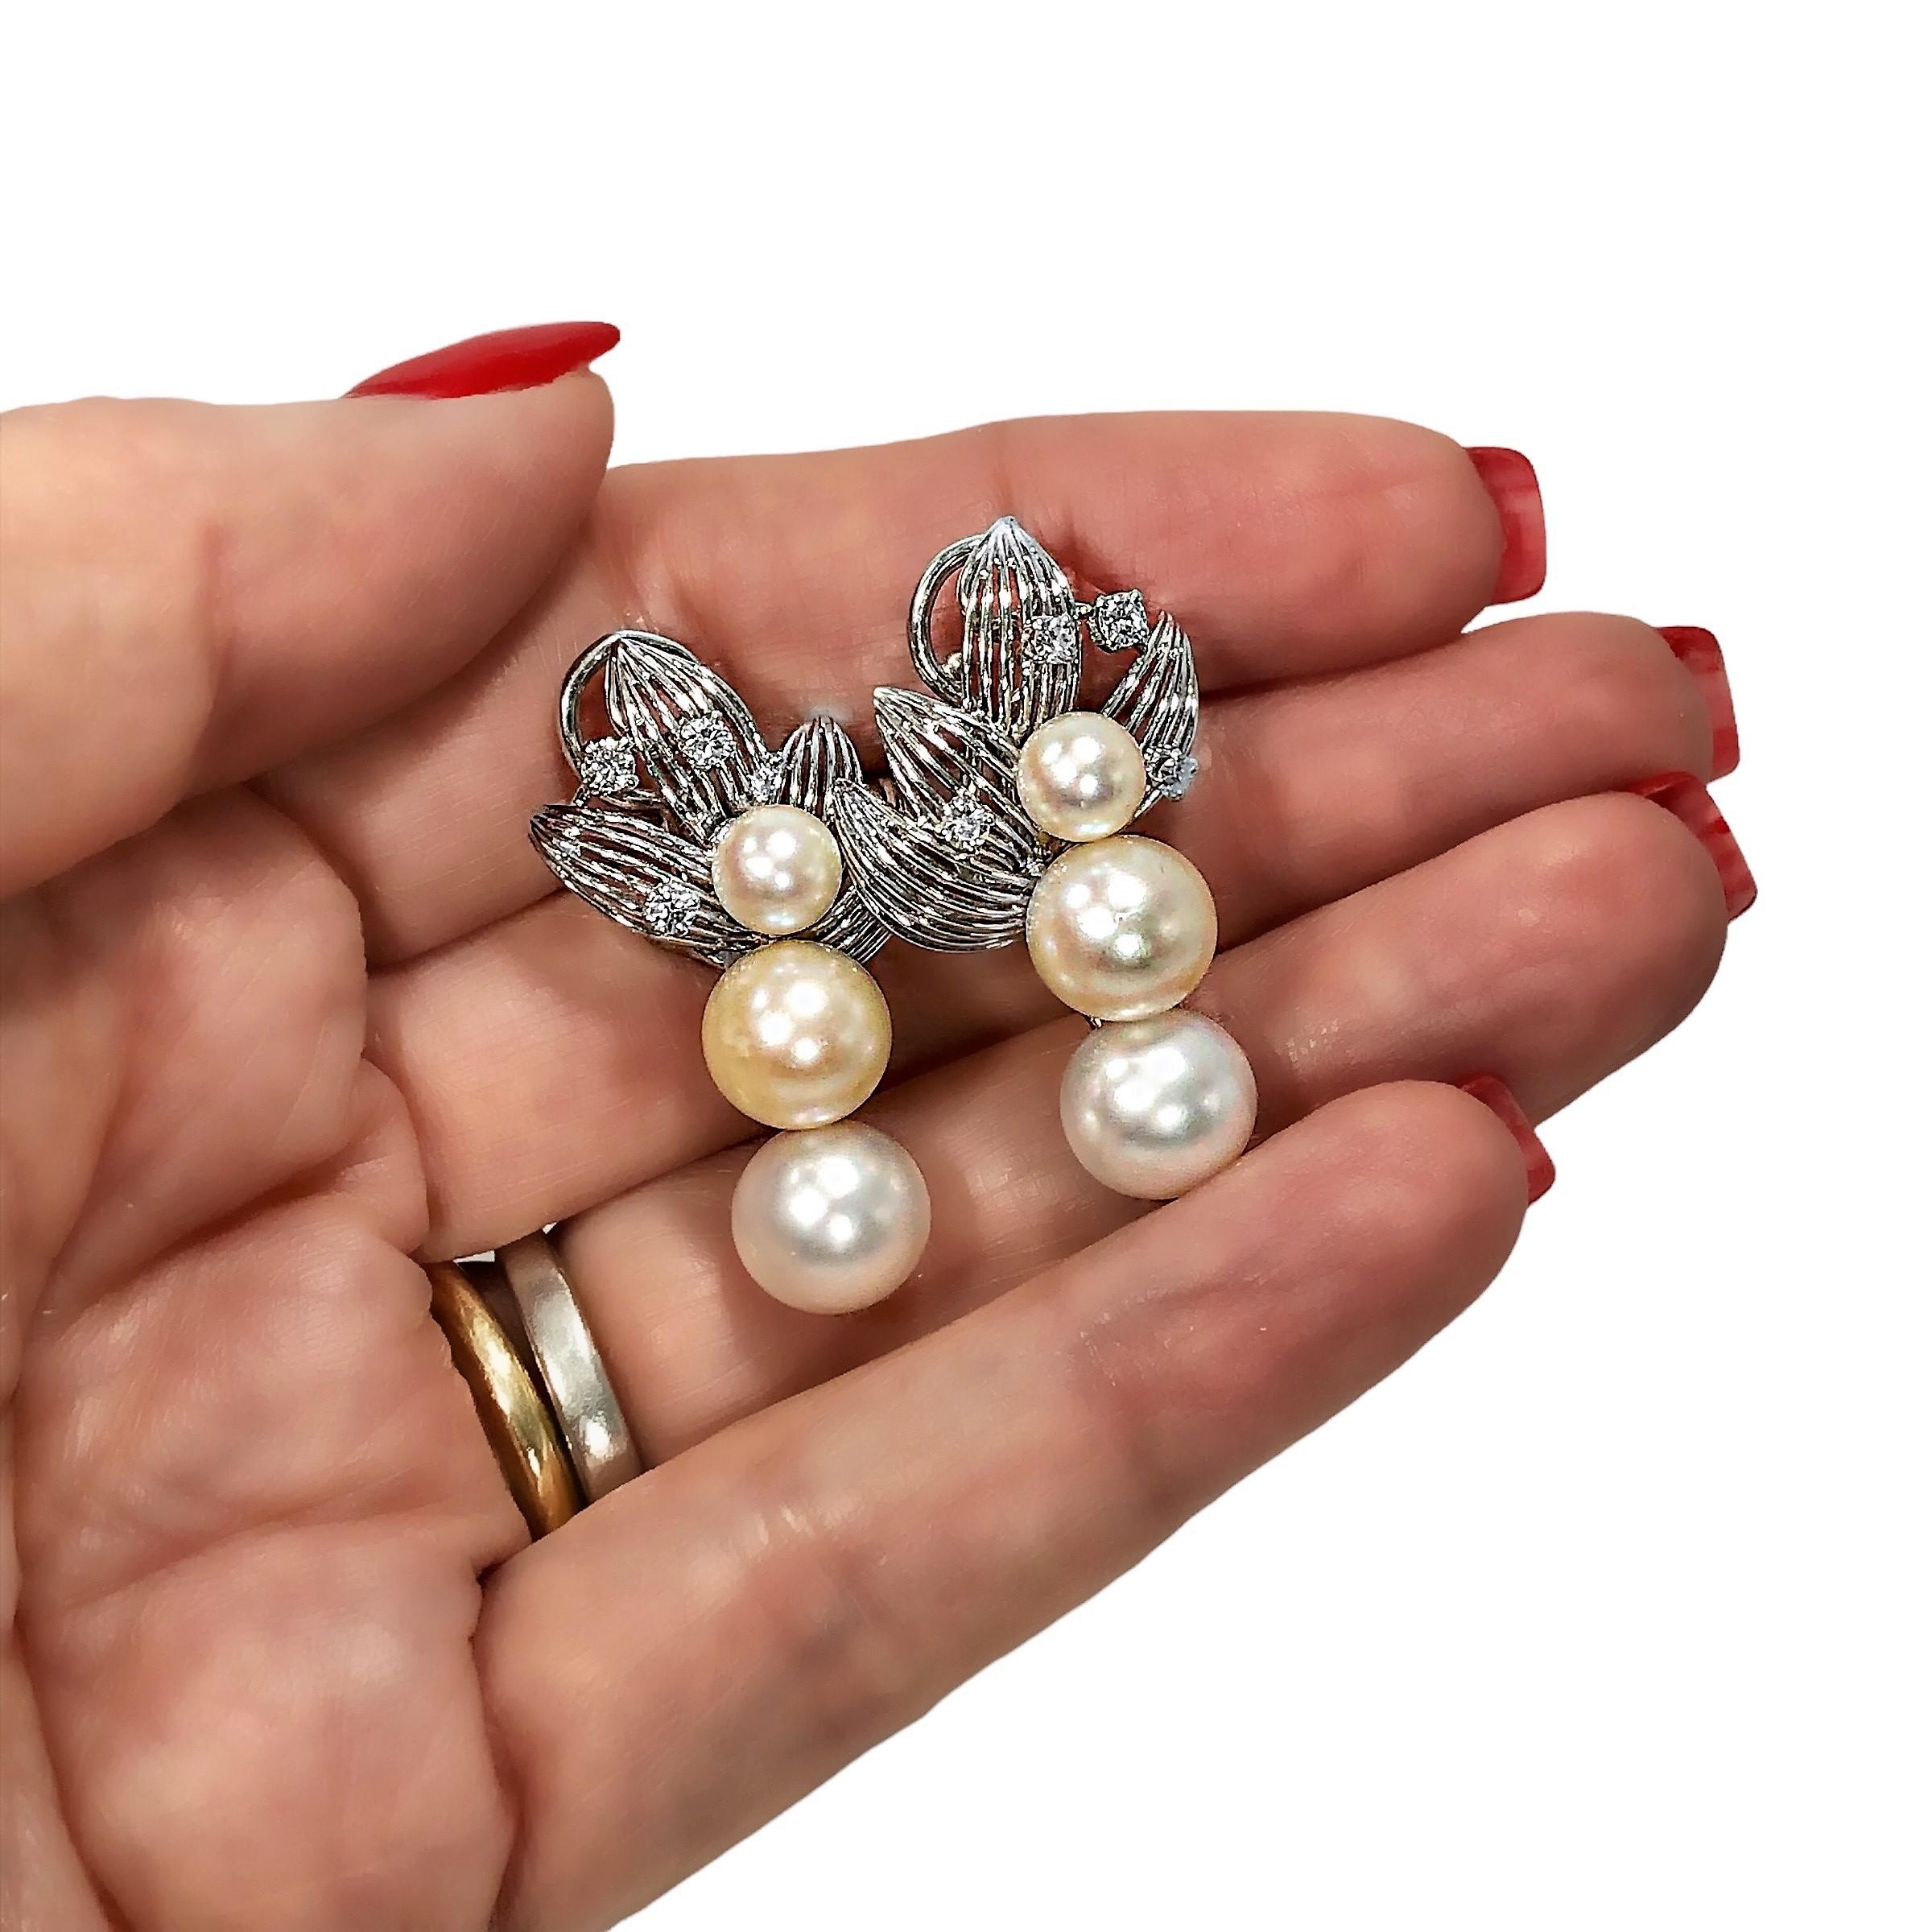 French Mid-20th Century 18K White Gold, Pearl and Diamond Earrings For Sale 1